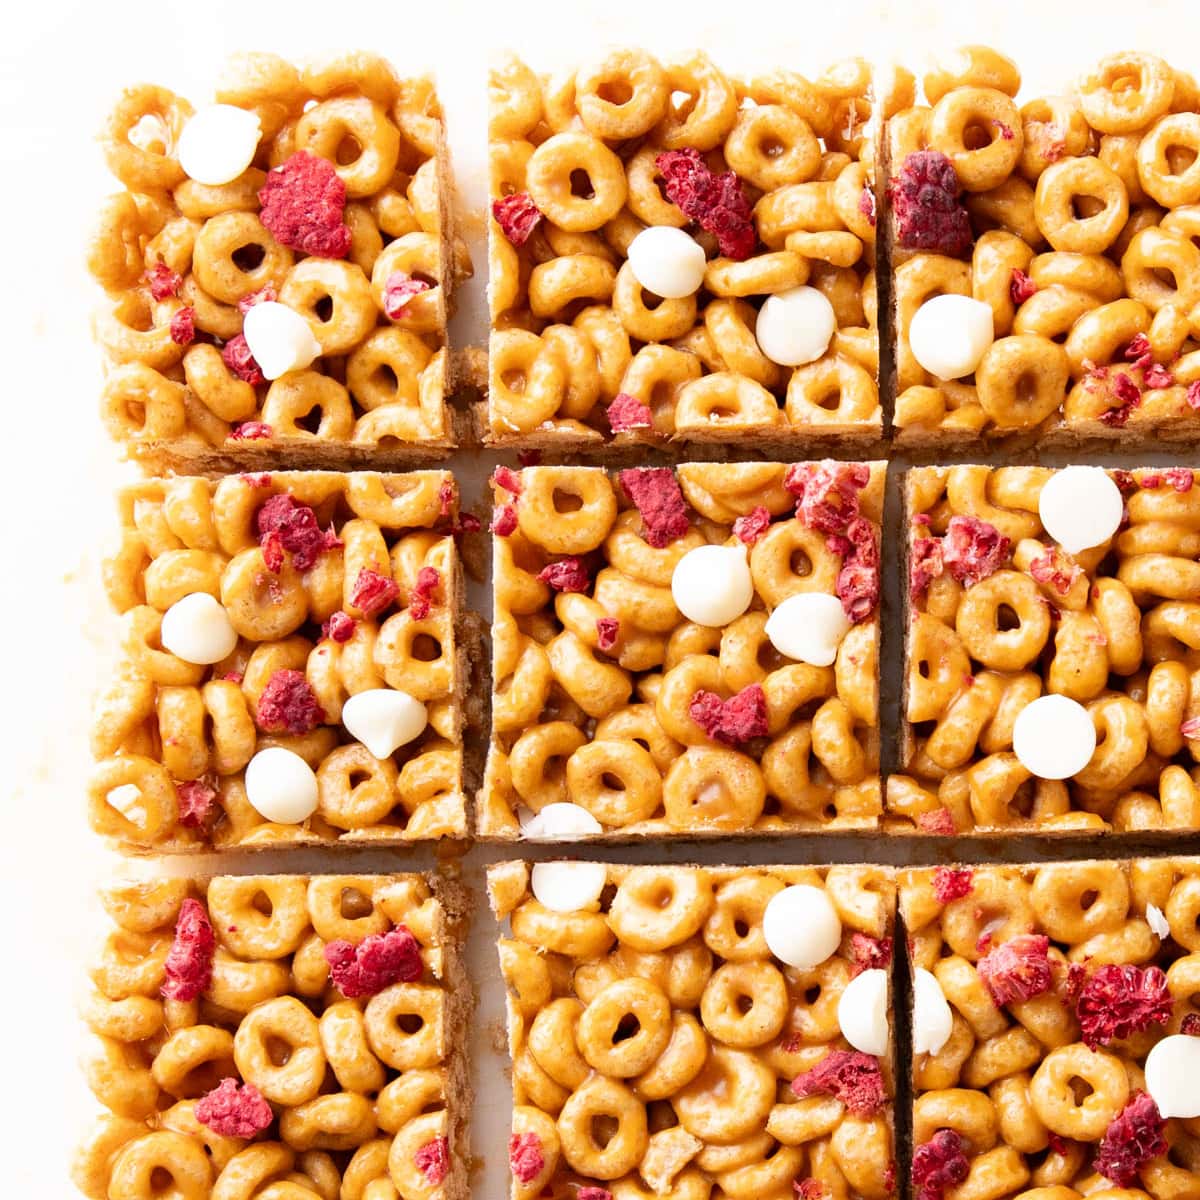 Cereal bars made with Cheerios, fruit, and chocolate chips sliced and ready to eat on a white serving tray.